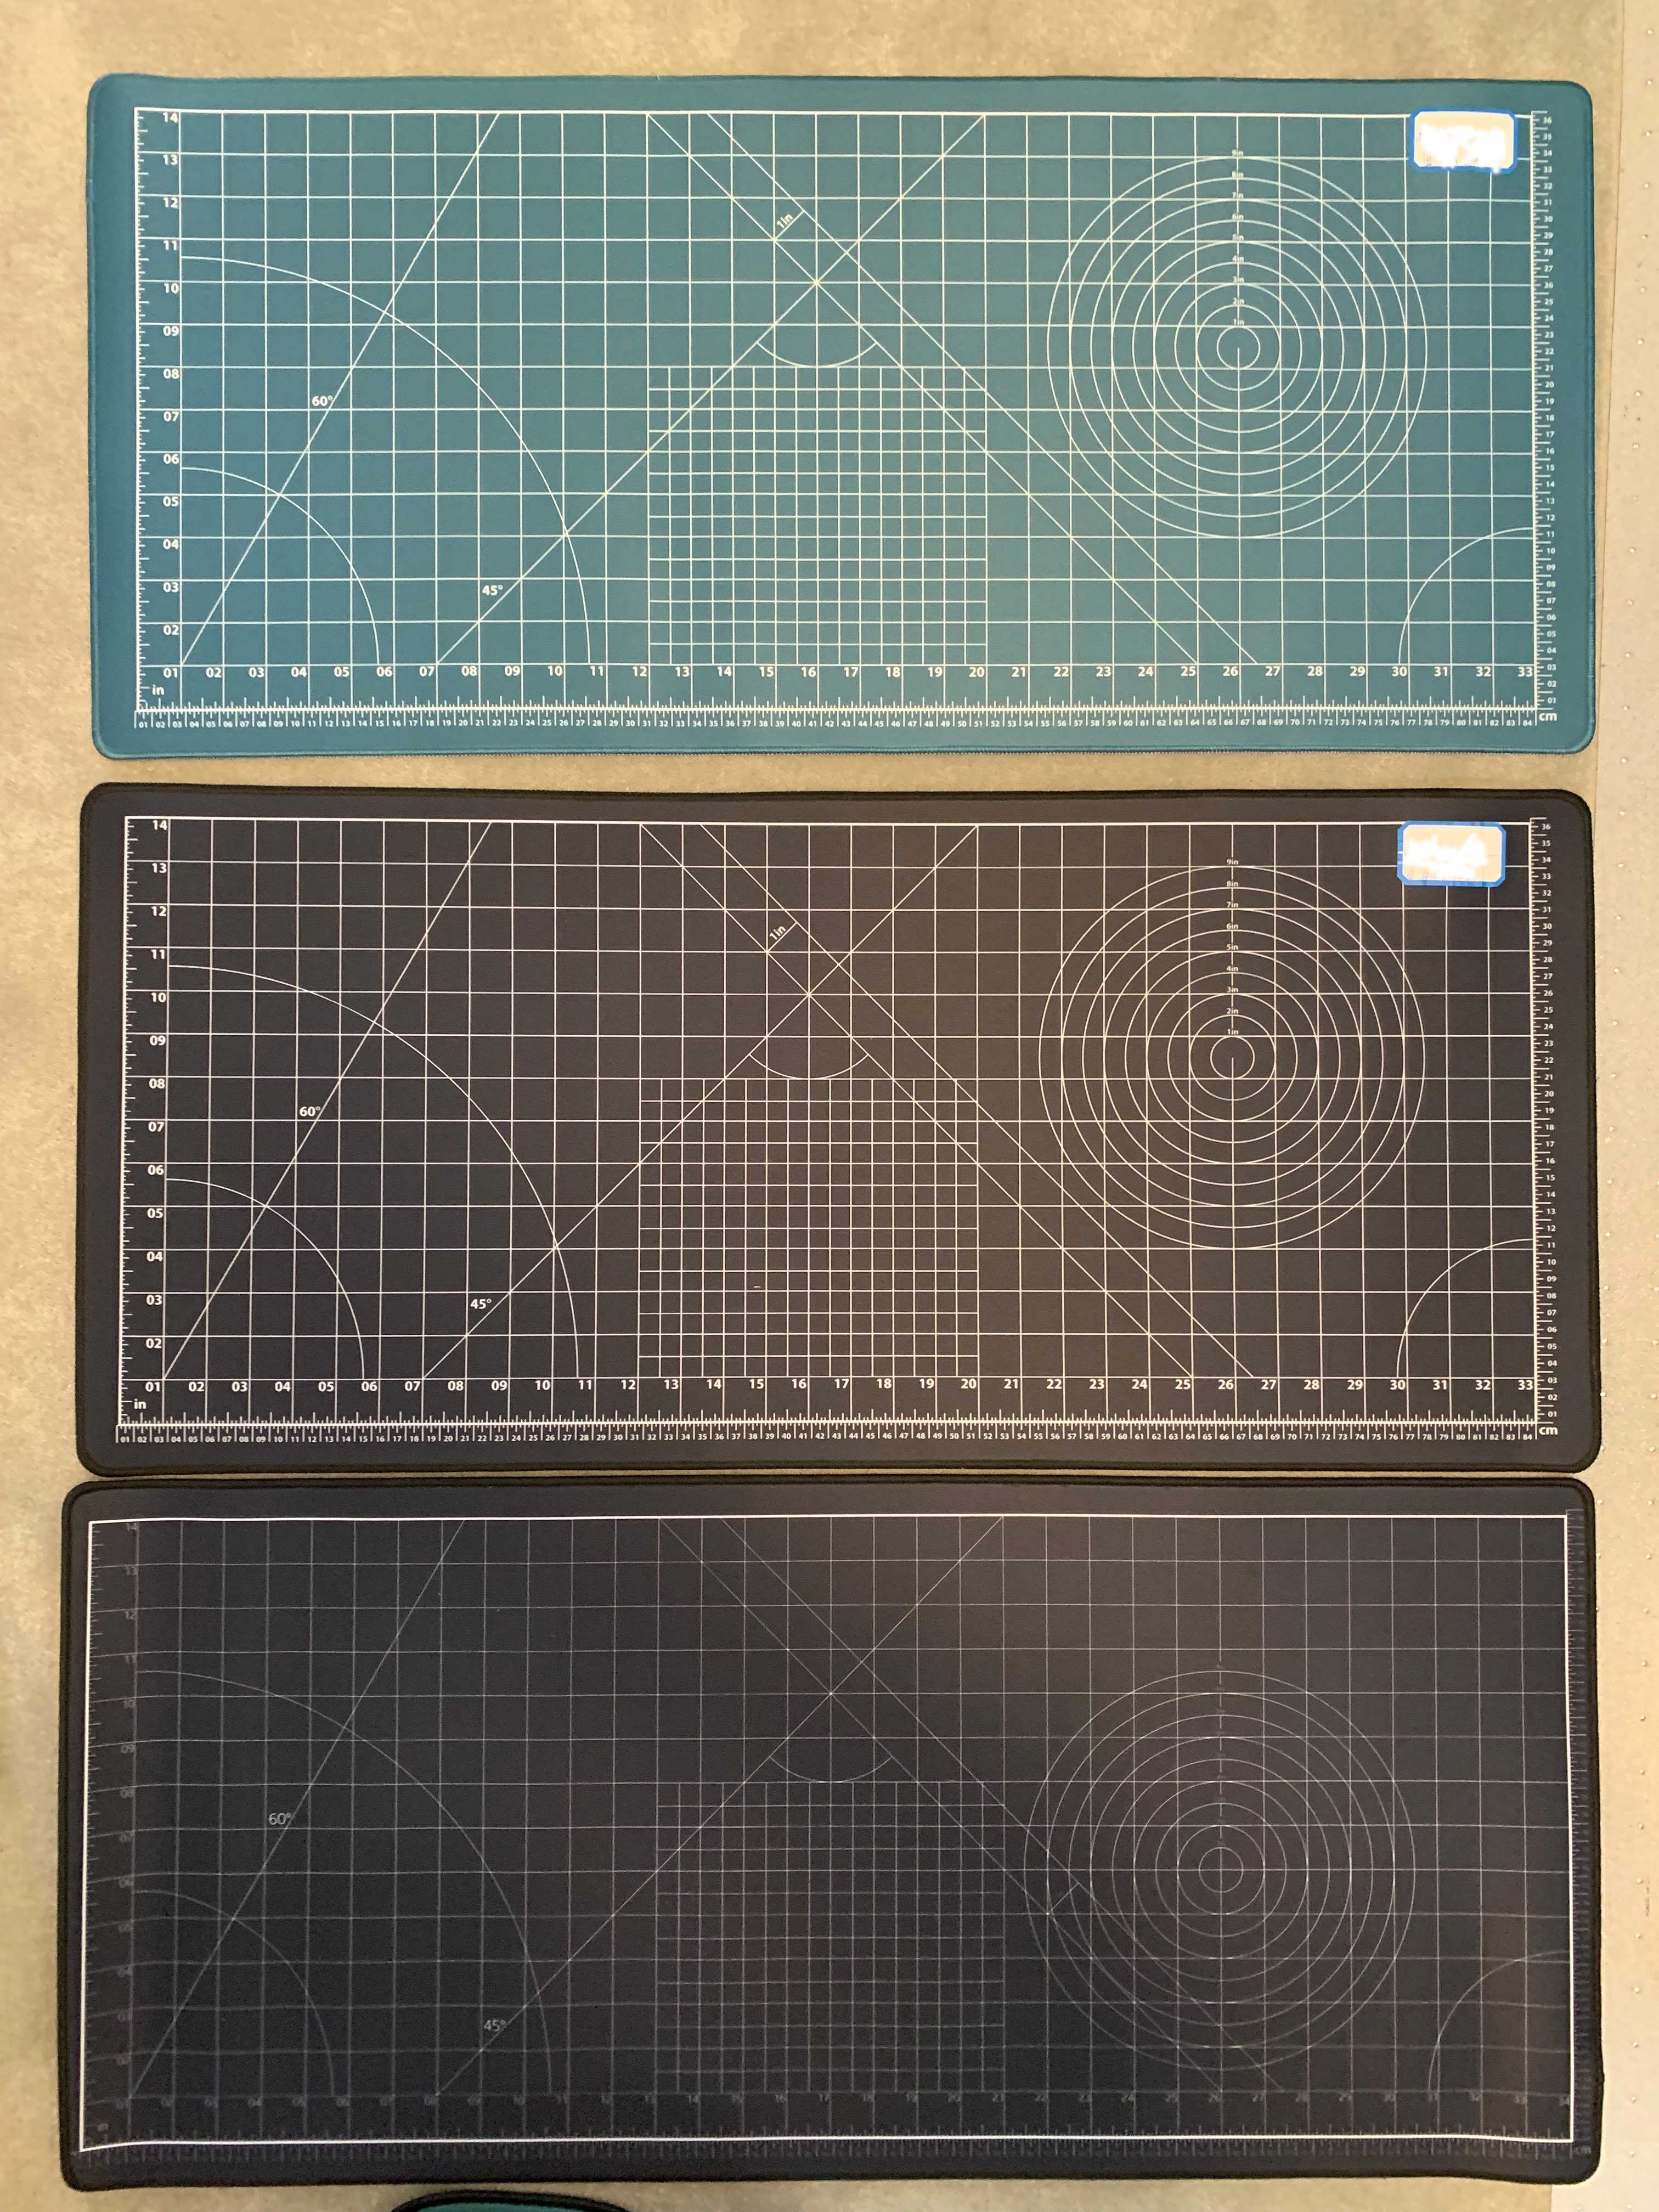 IC] Hobby mat themed desk pad (with accurate measurements)